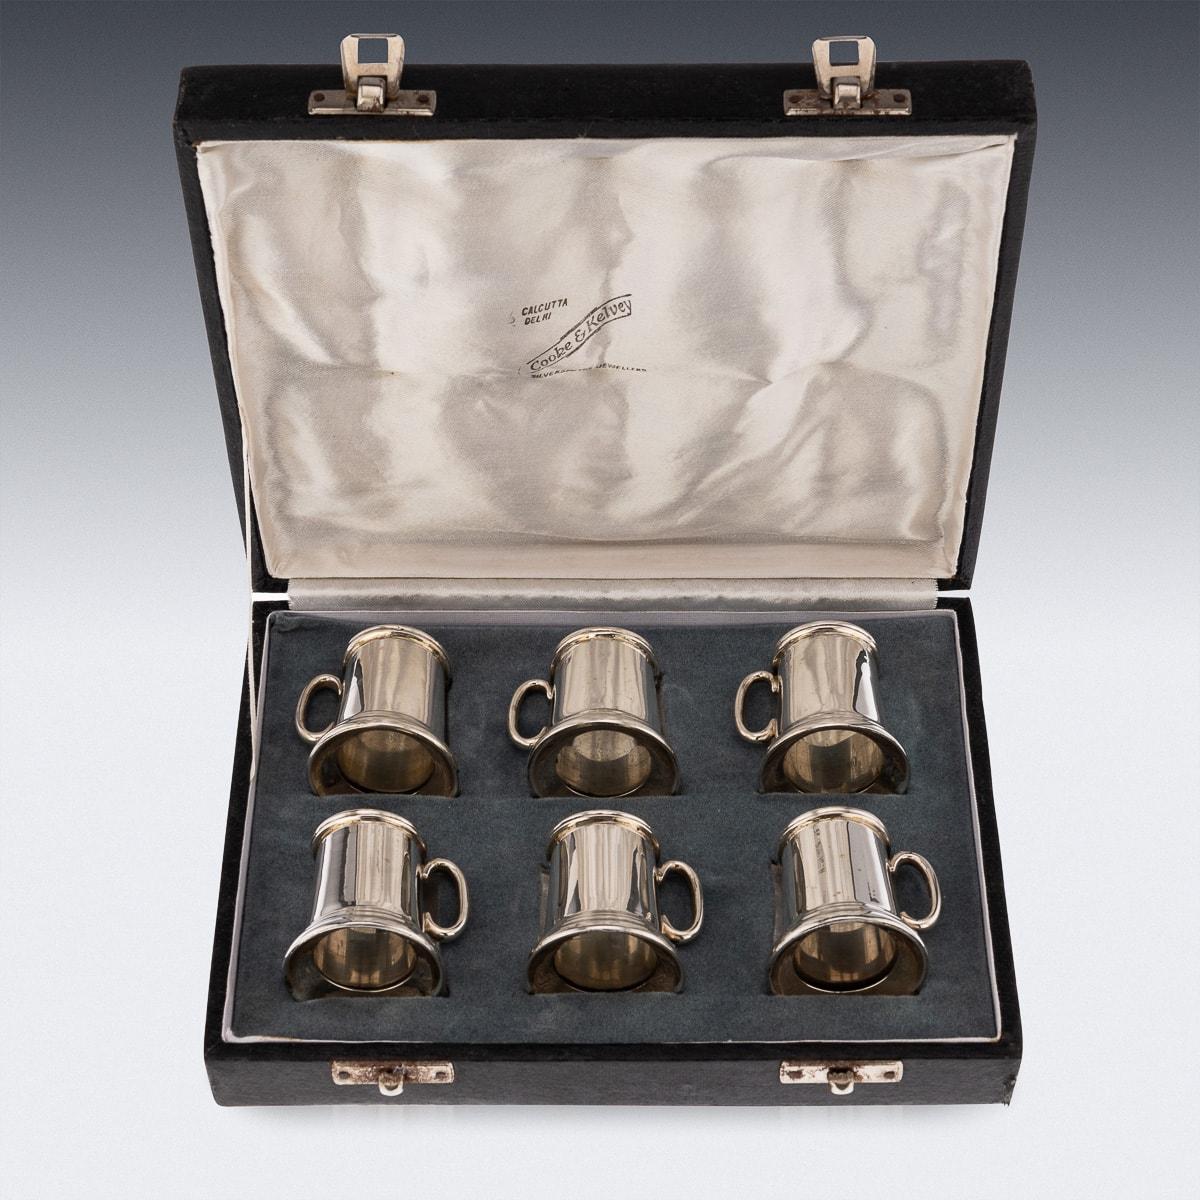 Antique 20th Century Indian solid silver set of six mini tankards. In my humble opinion, every dinner party needs a set of these 'tankards' brought out with the After Eights to finish the evening right. Of double sho size (50ml) they take he form of